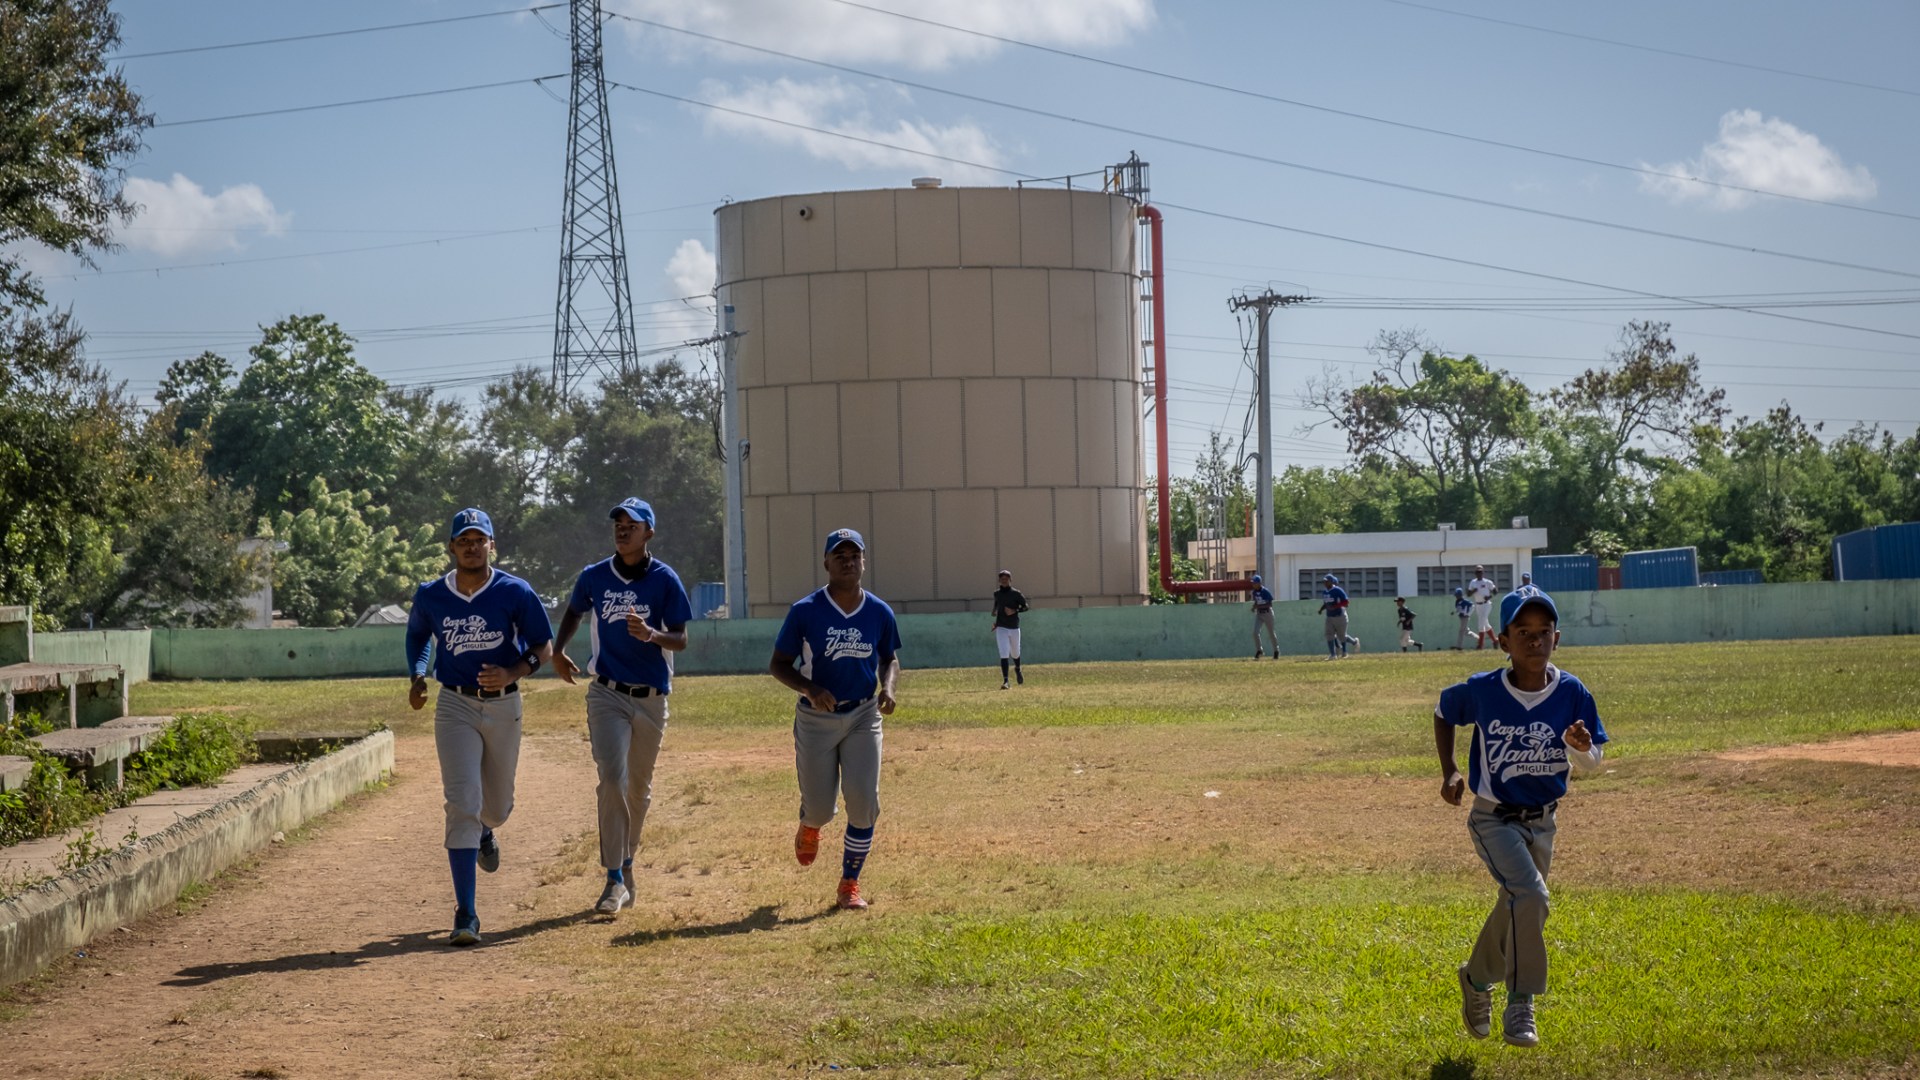 Boys playing baseball jog on a pitch that lies beside chemical storage containers